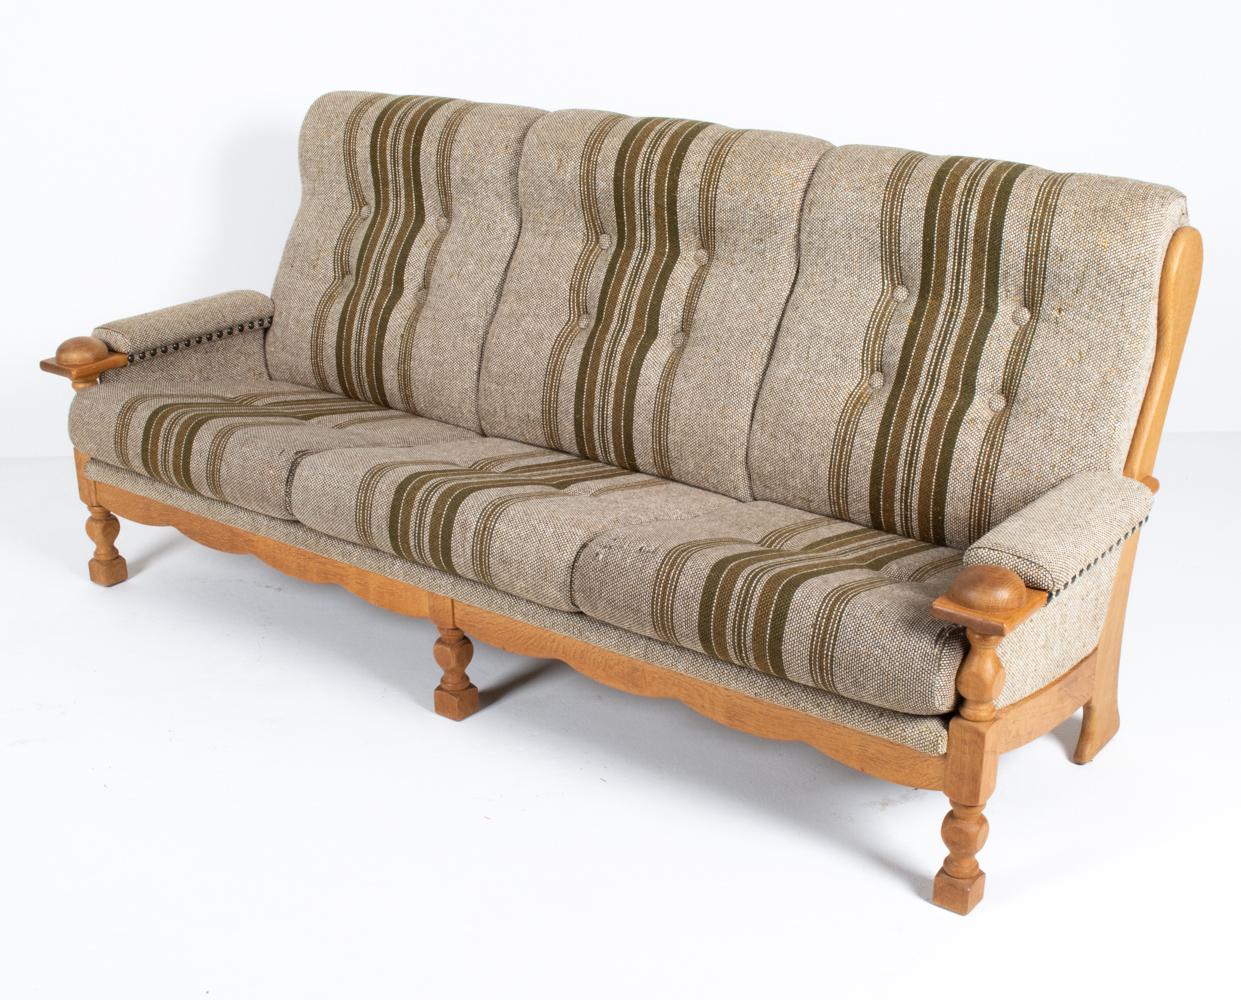 This unique and utterly cool sofa by Henning Kjærnulf would be a stunning addition to a California Ranch or Bungalow-style home! The design consists of a Spanish Mission-inspired silhouette reimagined in gorgeous quarter-sawn white oak, with playful